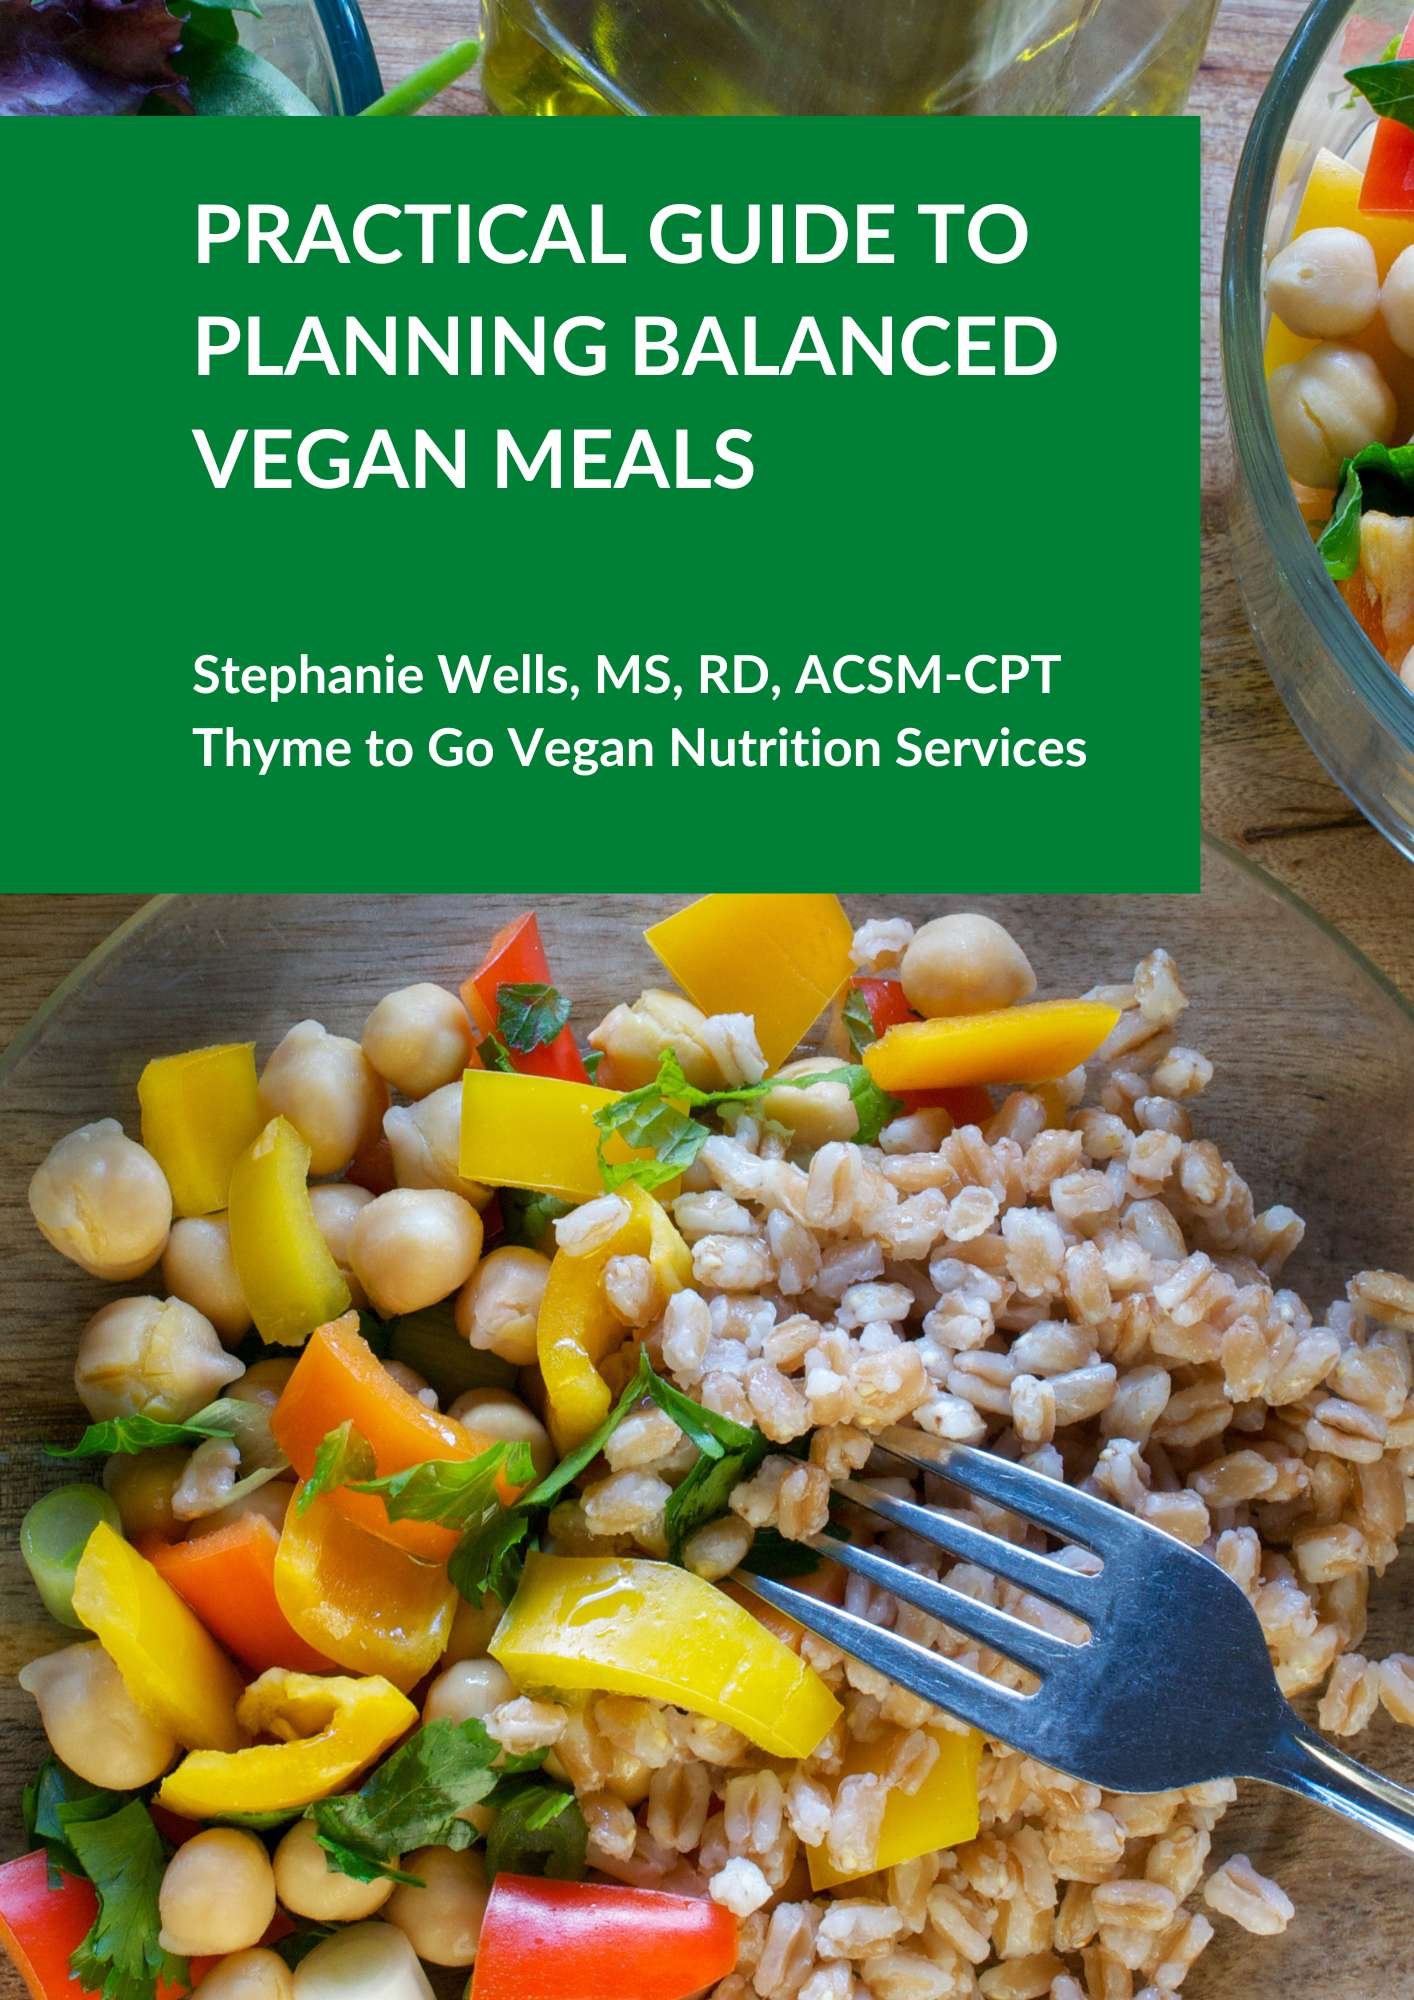 Cover of vegan meal planning guide with a colorful meal of chickpeas, barley, and fresh vegetables